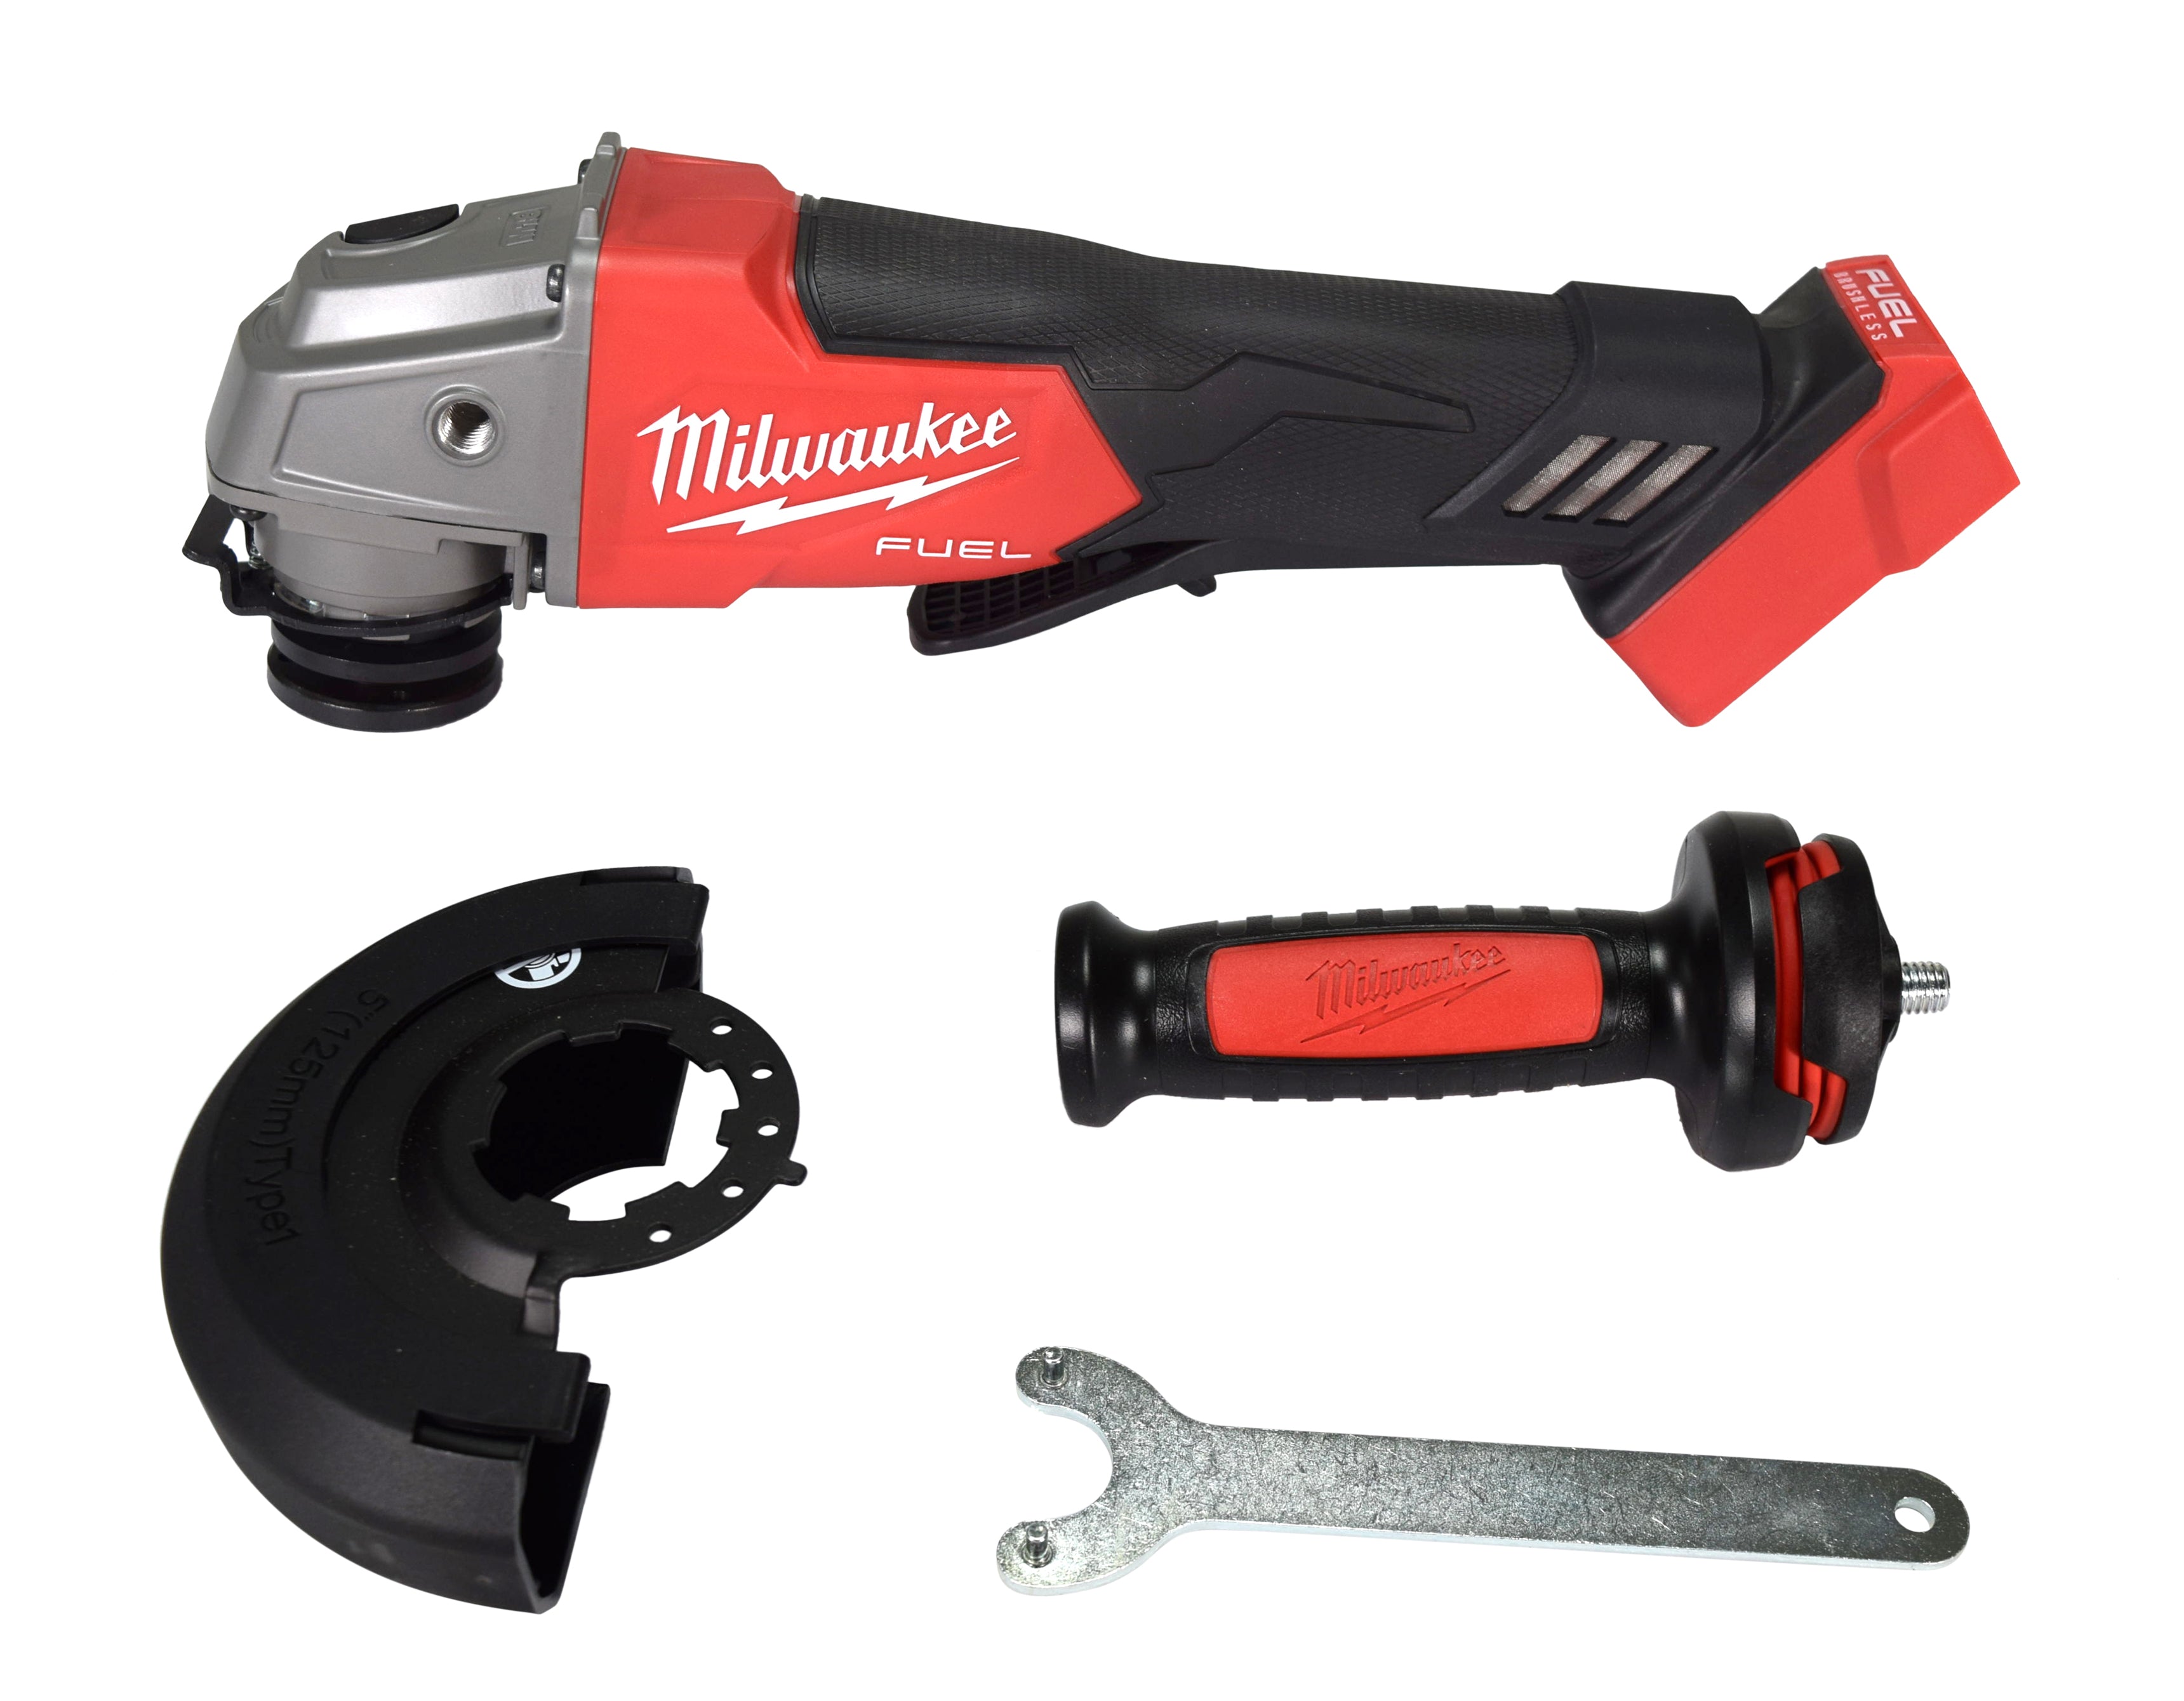 Milwaukee-2880-20-M18-FUEL-4-1-2-5-Grinder-Paddle-Switch-No-Lock-No-Charger-No-Battery-Bare-Tool-Only-image-1